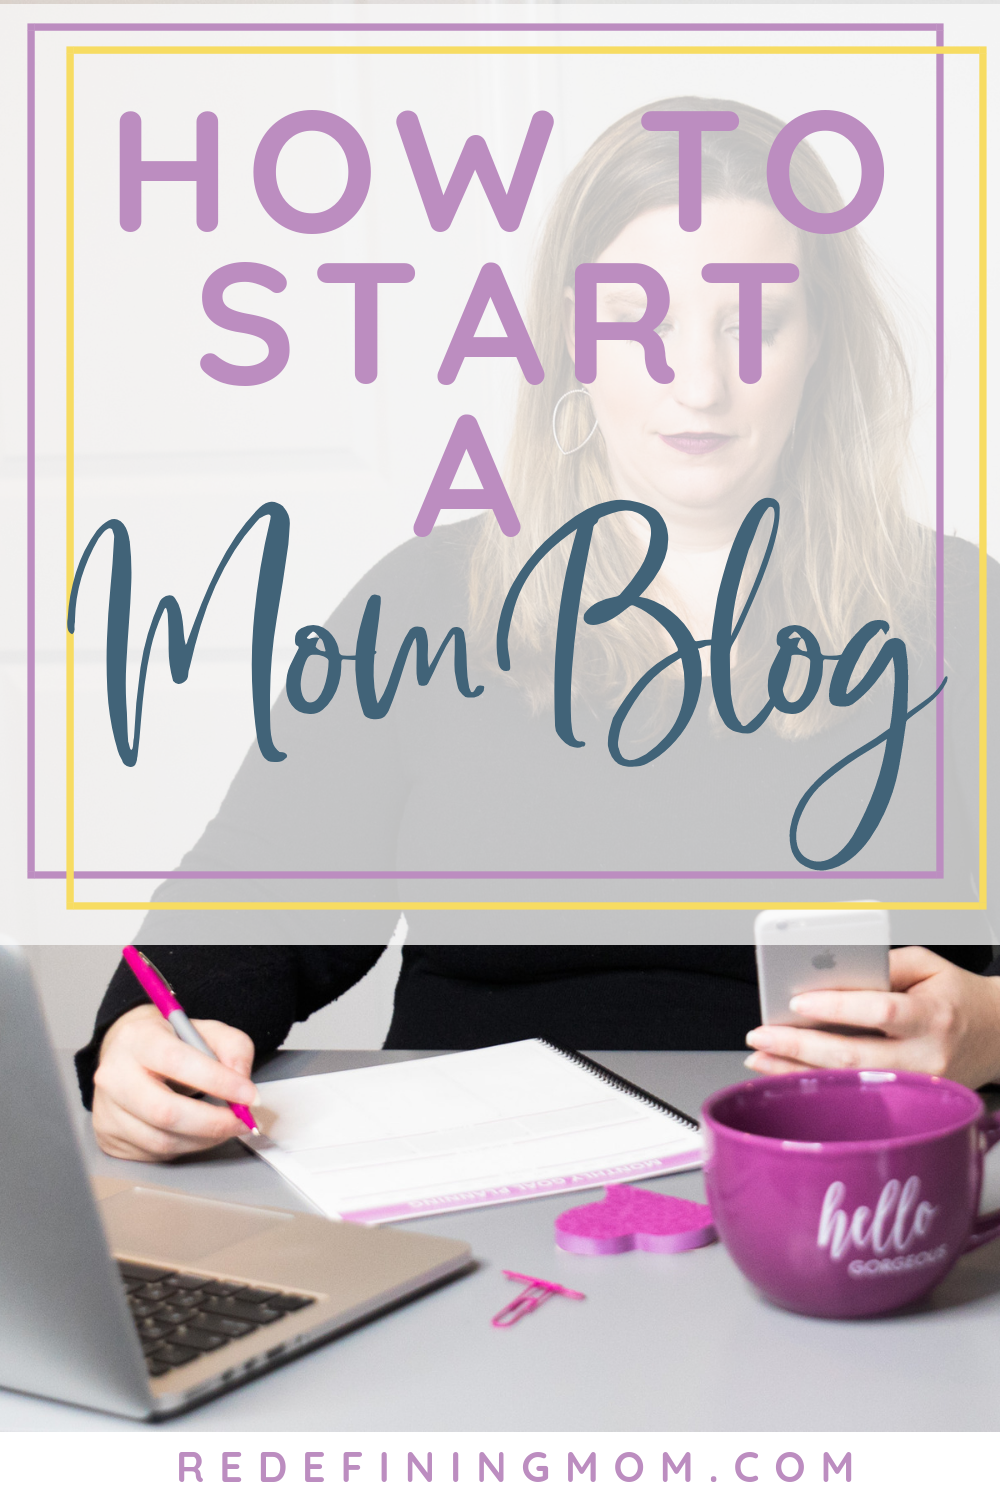 How to start a mom blog in 2019. The Ultimate Beginners Guide to Blogging: How to Get Started Blogging for Money explains how to start a blog for beginners by explaining the 4 stages of blogging and how to build your audience so that you can make money from your blog. This is a comprehensive step-by-step guide for setting up, growing, and monetizing your blog!